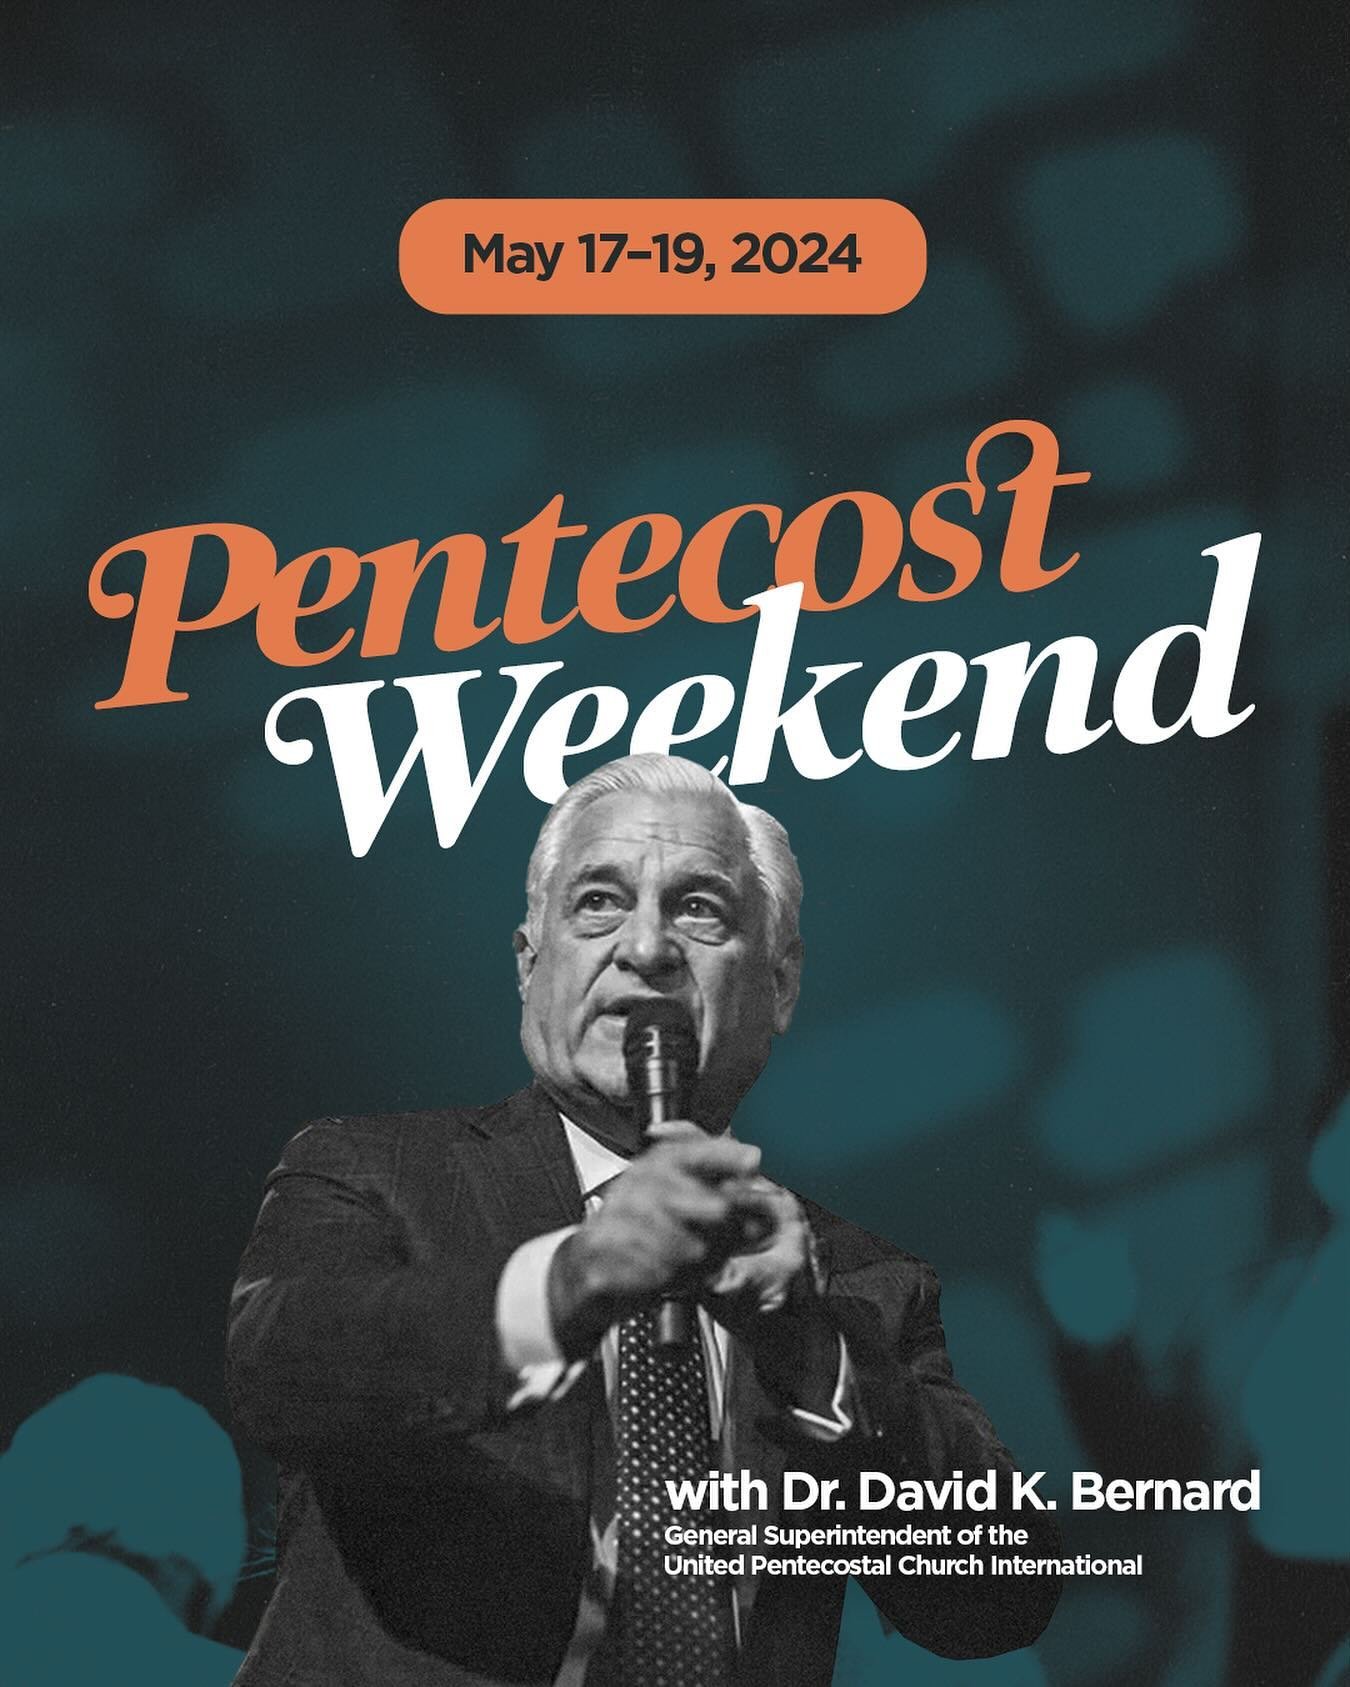 🚨 SAVE THE DATE 🚨 
Pentecost Weekend with Dr. David K. Bernard is May 17th-19th.